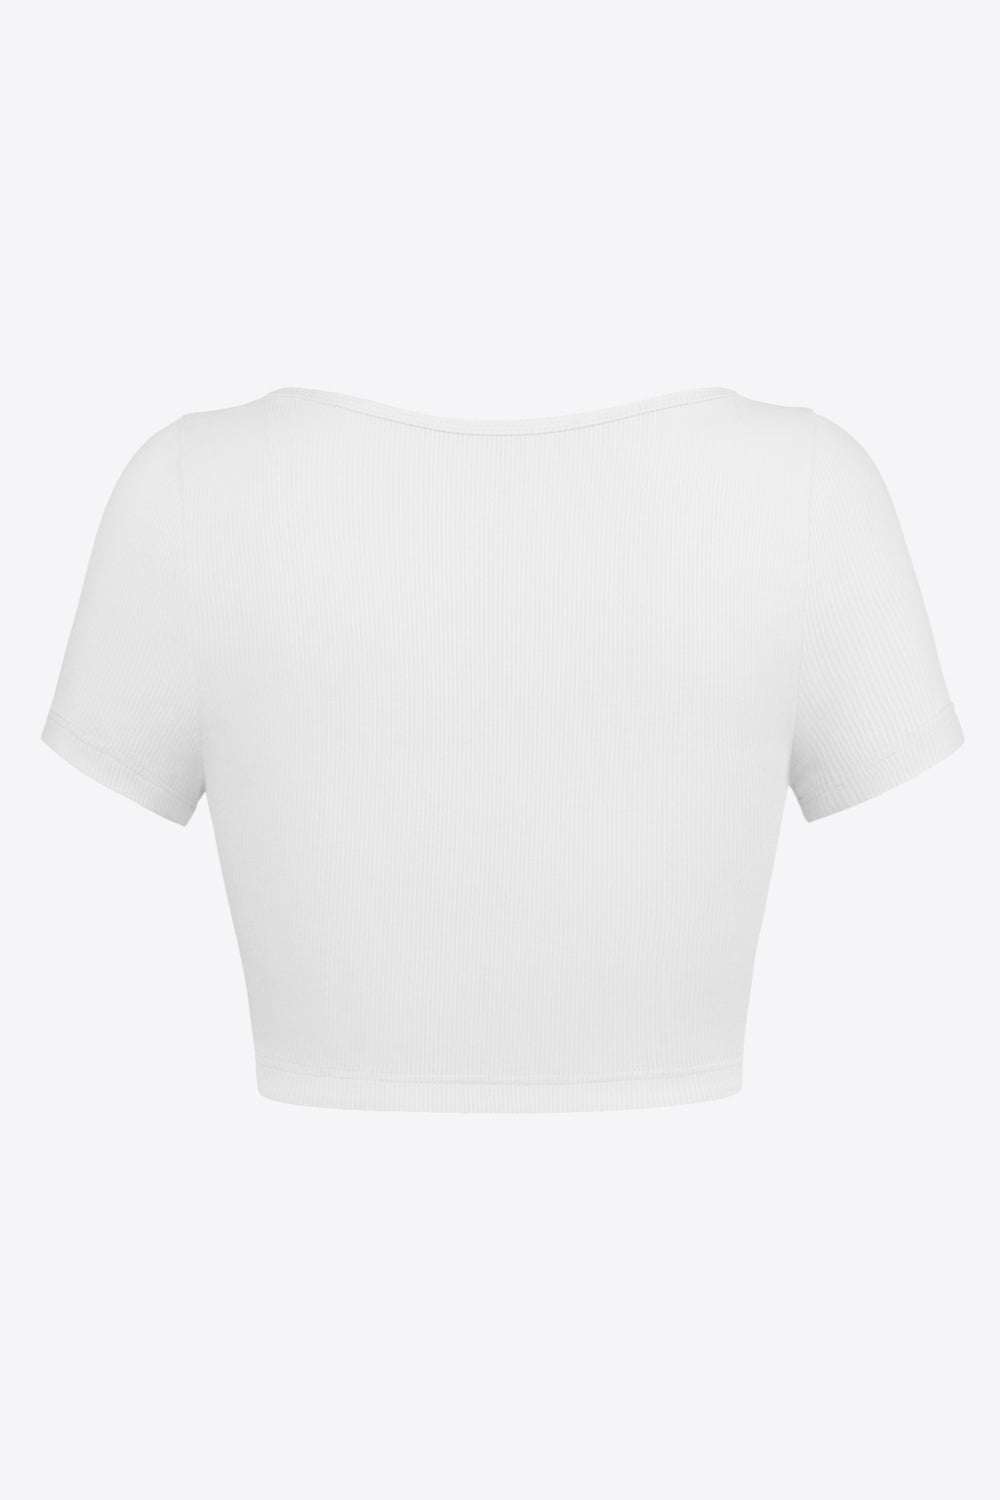 Square Neck Ribbed Crop Top - Women’s Clothing & Accessories - Shirts & Tops - 9 - 2024